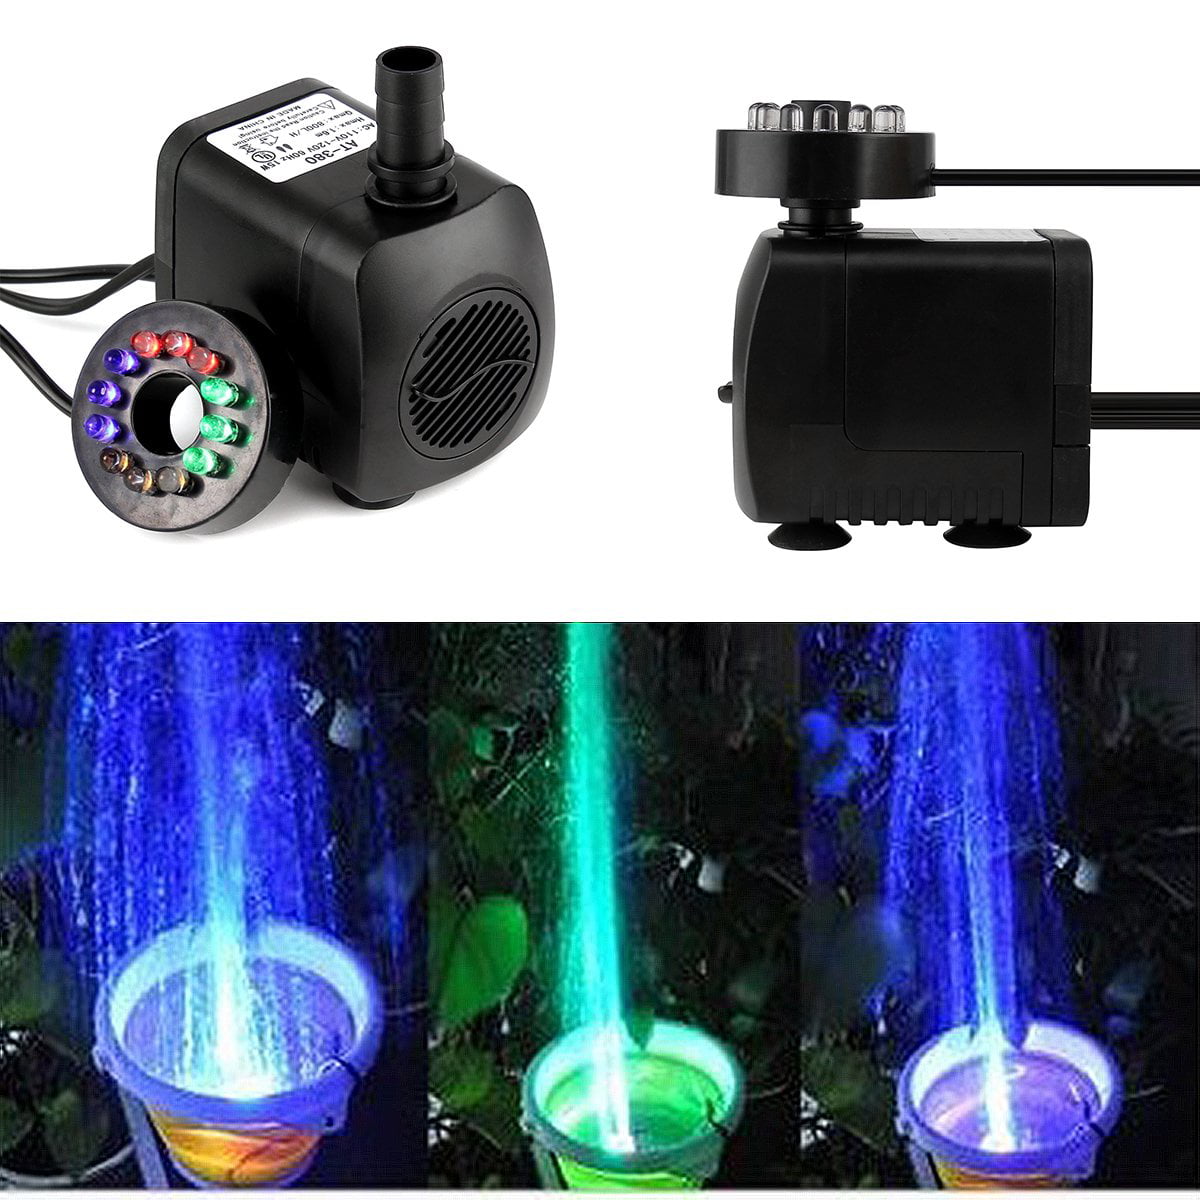 Submersible Water Pump with 12 LED Lights for Fountain Pool Garden Pond Fish GL 